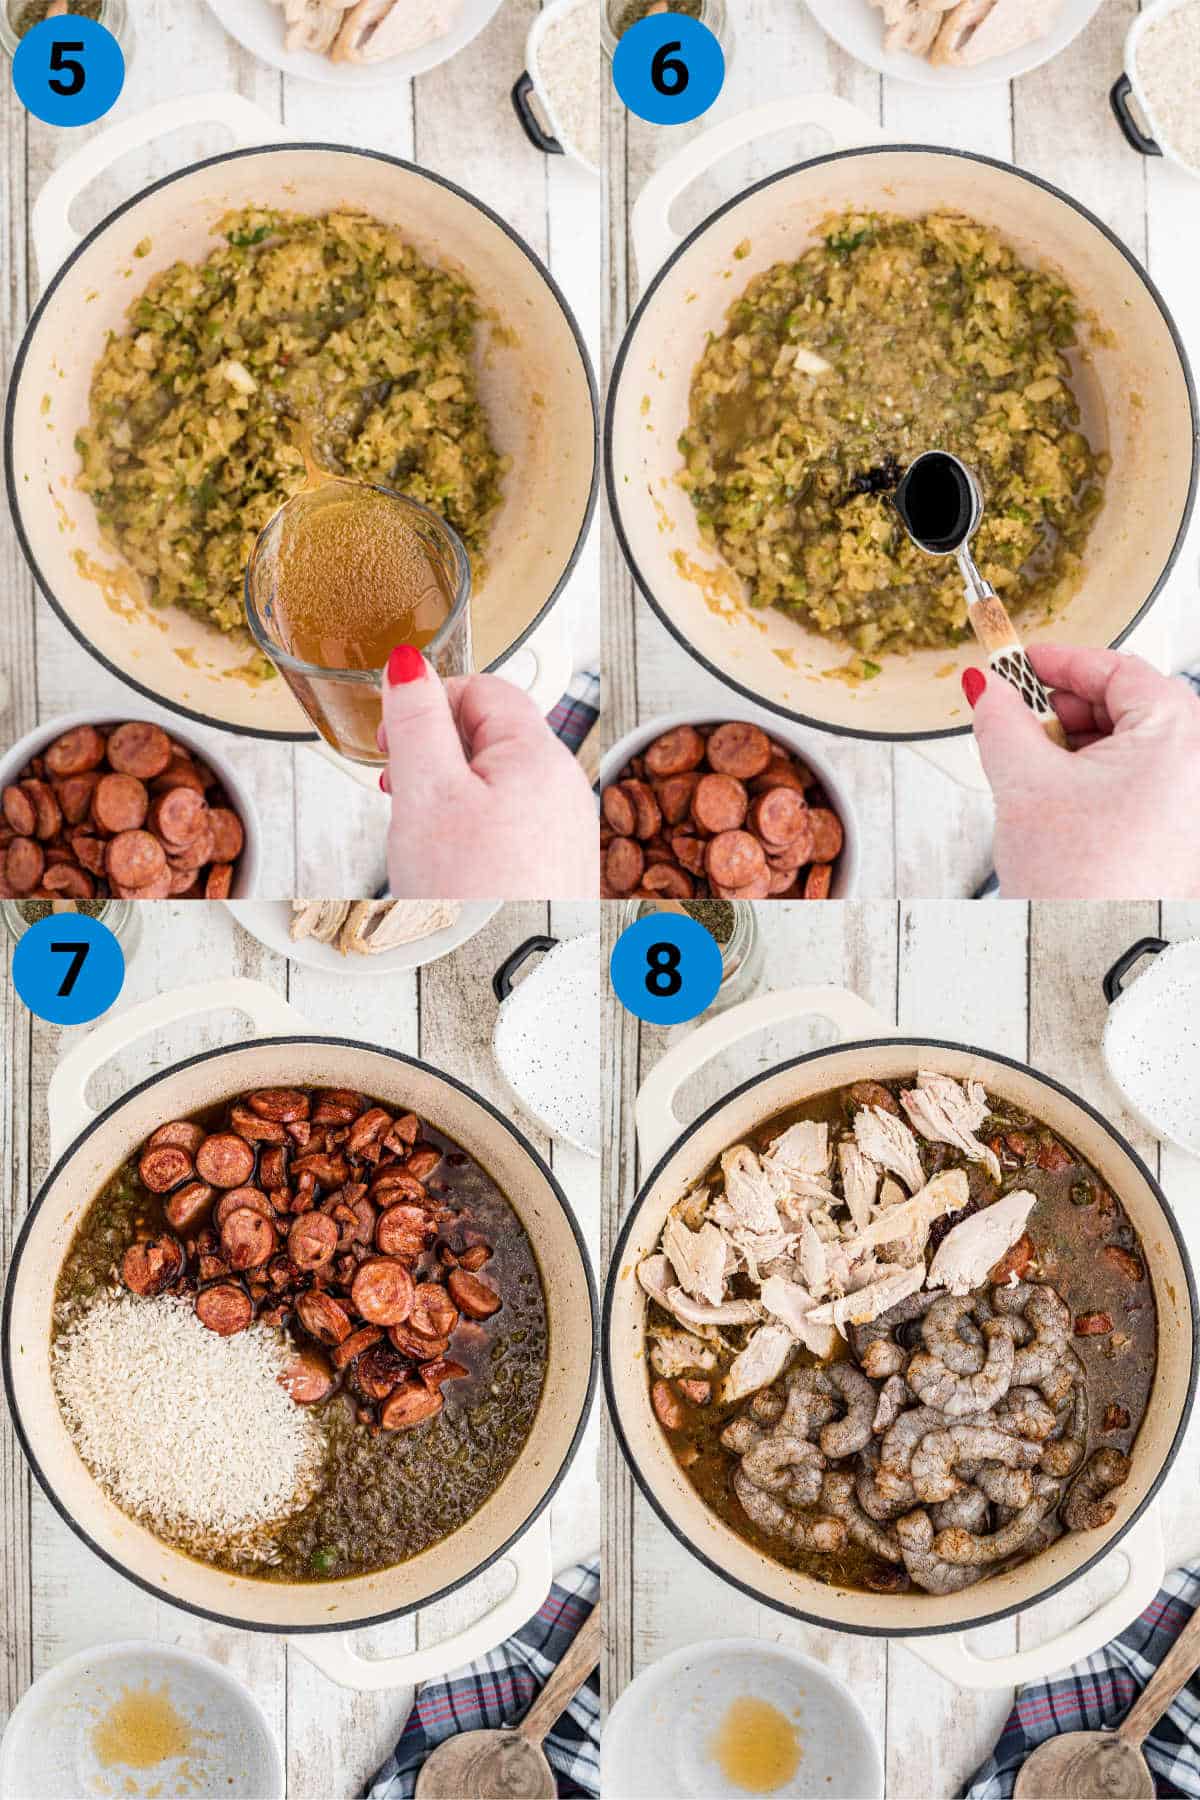 A collage of 4 images showing how to make a Jambalaya.